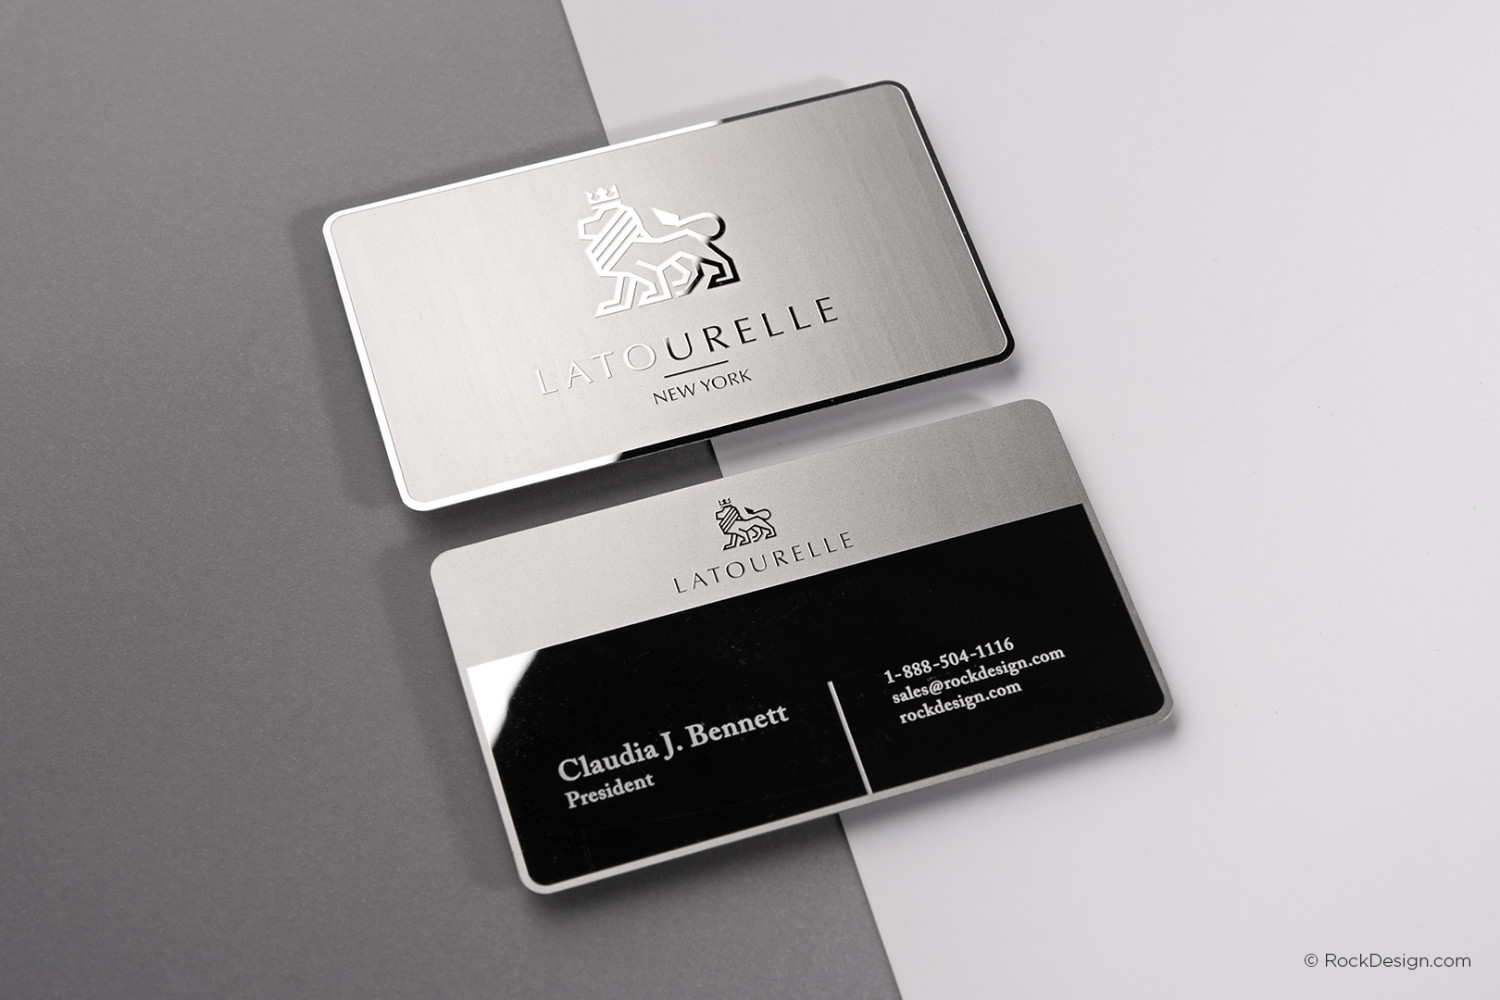 Lawyer Business Cards Templates  Best Template Ideas Throughout Lawyer Business Cards Templates